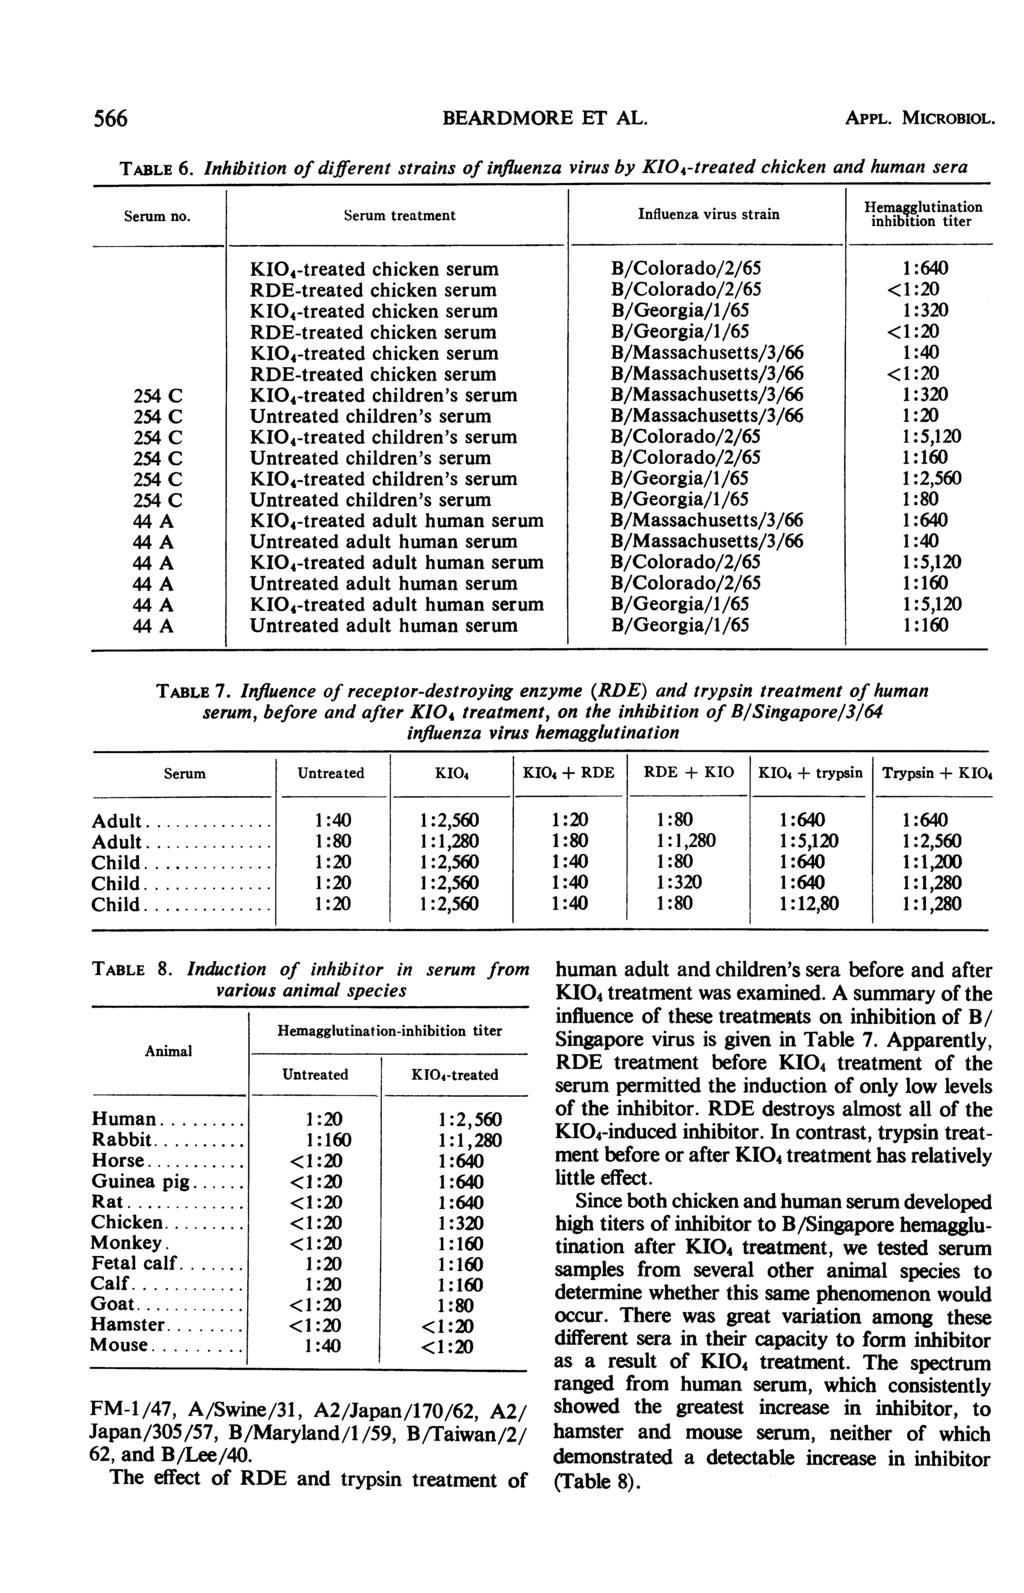 566 BEARDMORE ET AL. APPL. MICROBIOL. TABLE 6. Inhibition of different strains of influenza virus by KI04-treated chicken and human sera Serum no.